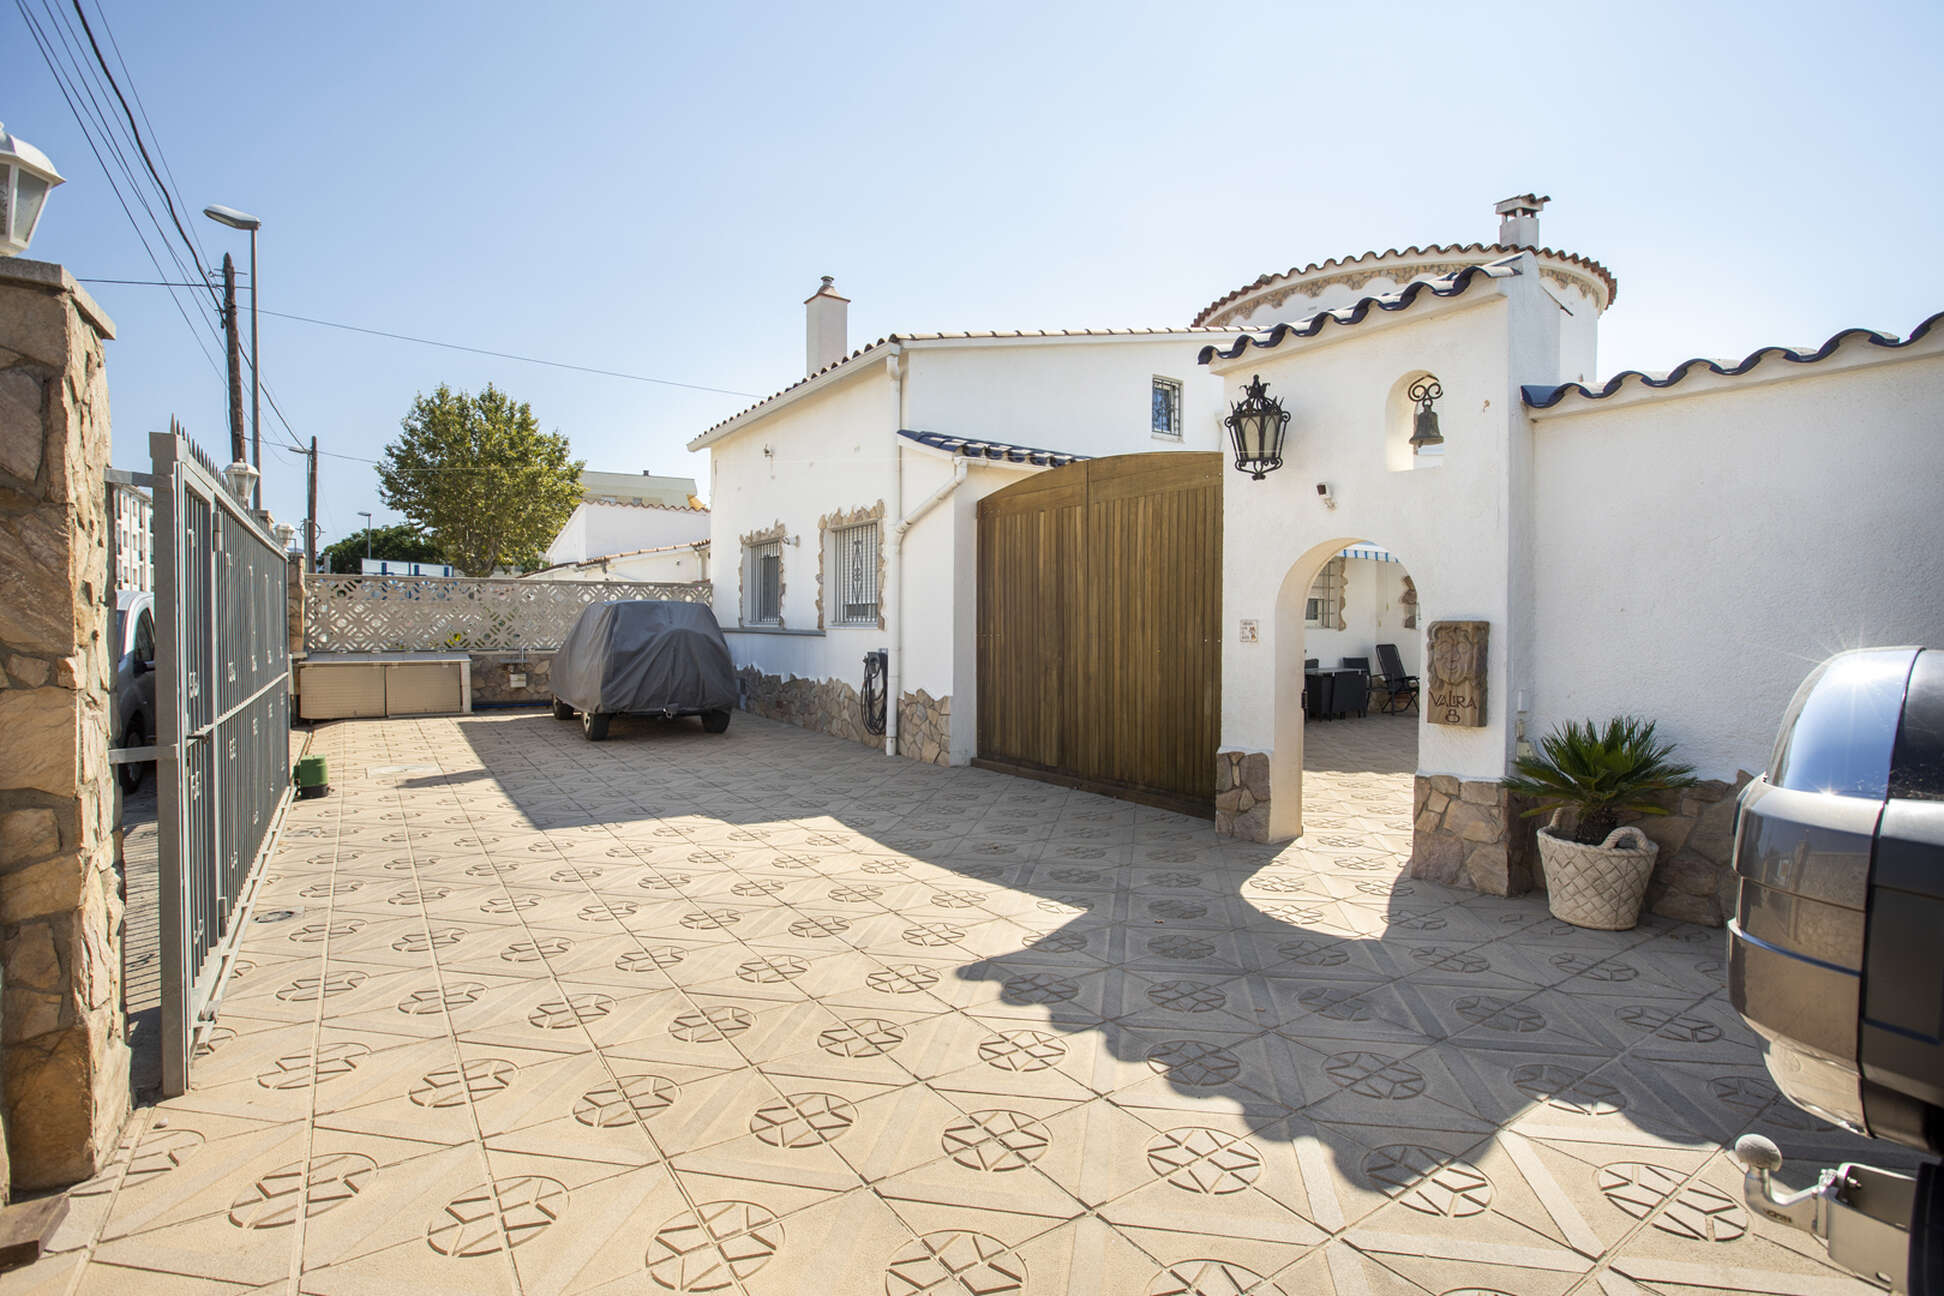 Two magnificent houses for sale on a plot of 900M2 with 20 meters of mooring